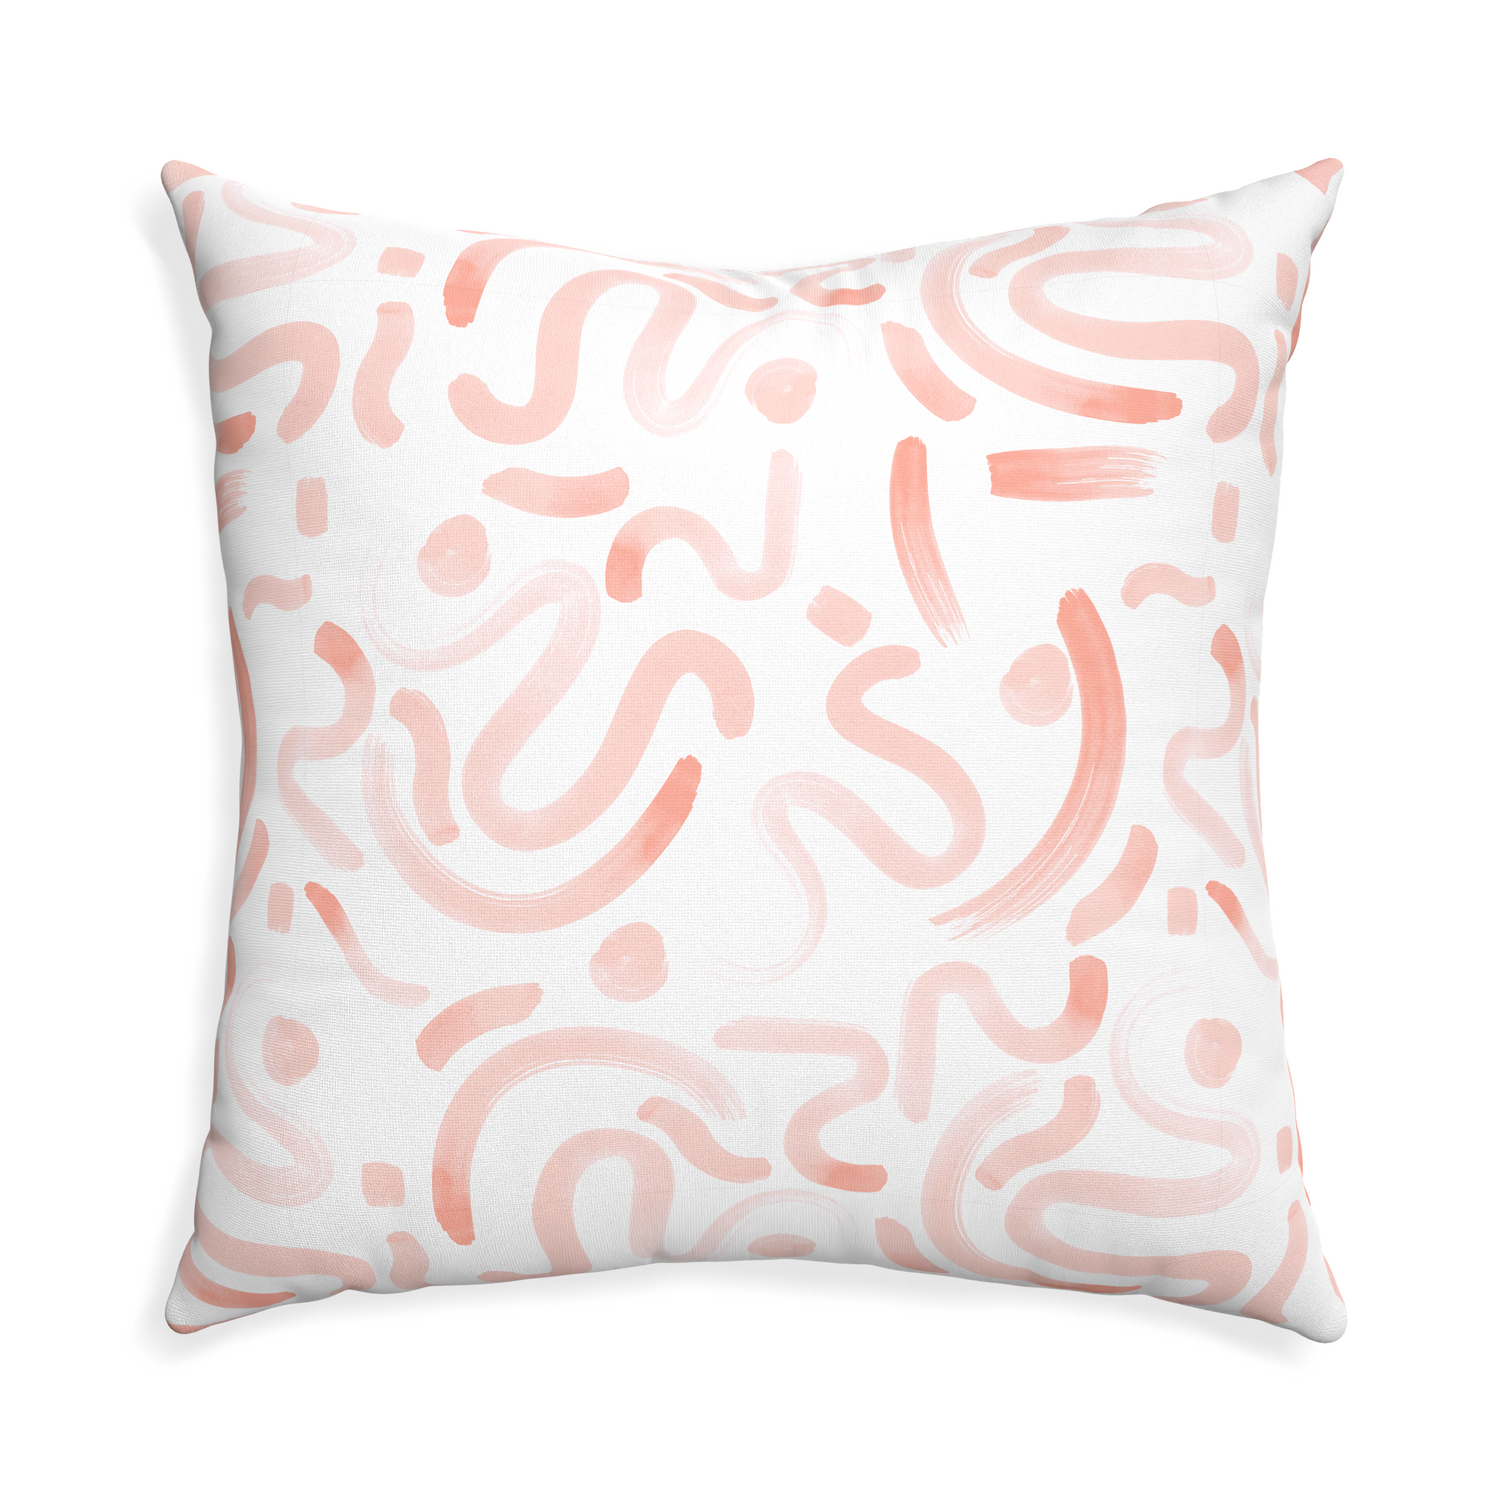 Euro-sham hockney pink custom pink graphicpillow with none on white background